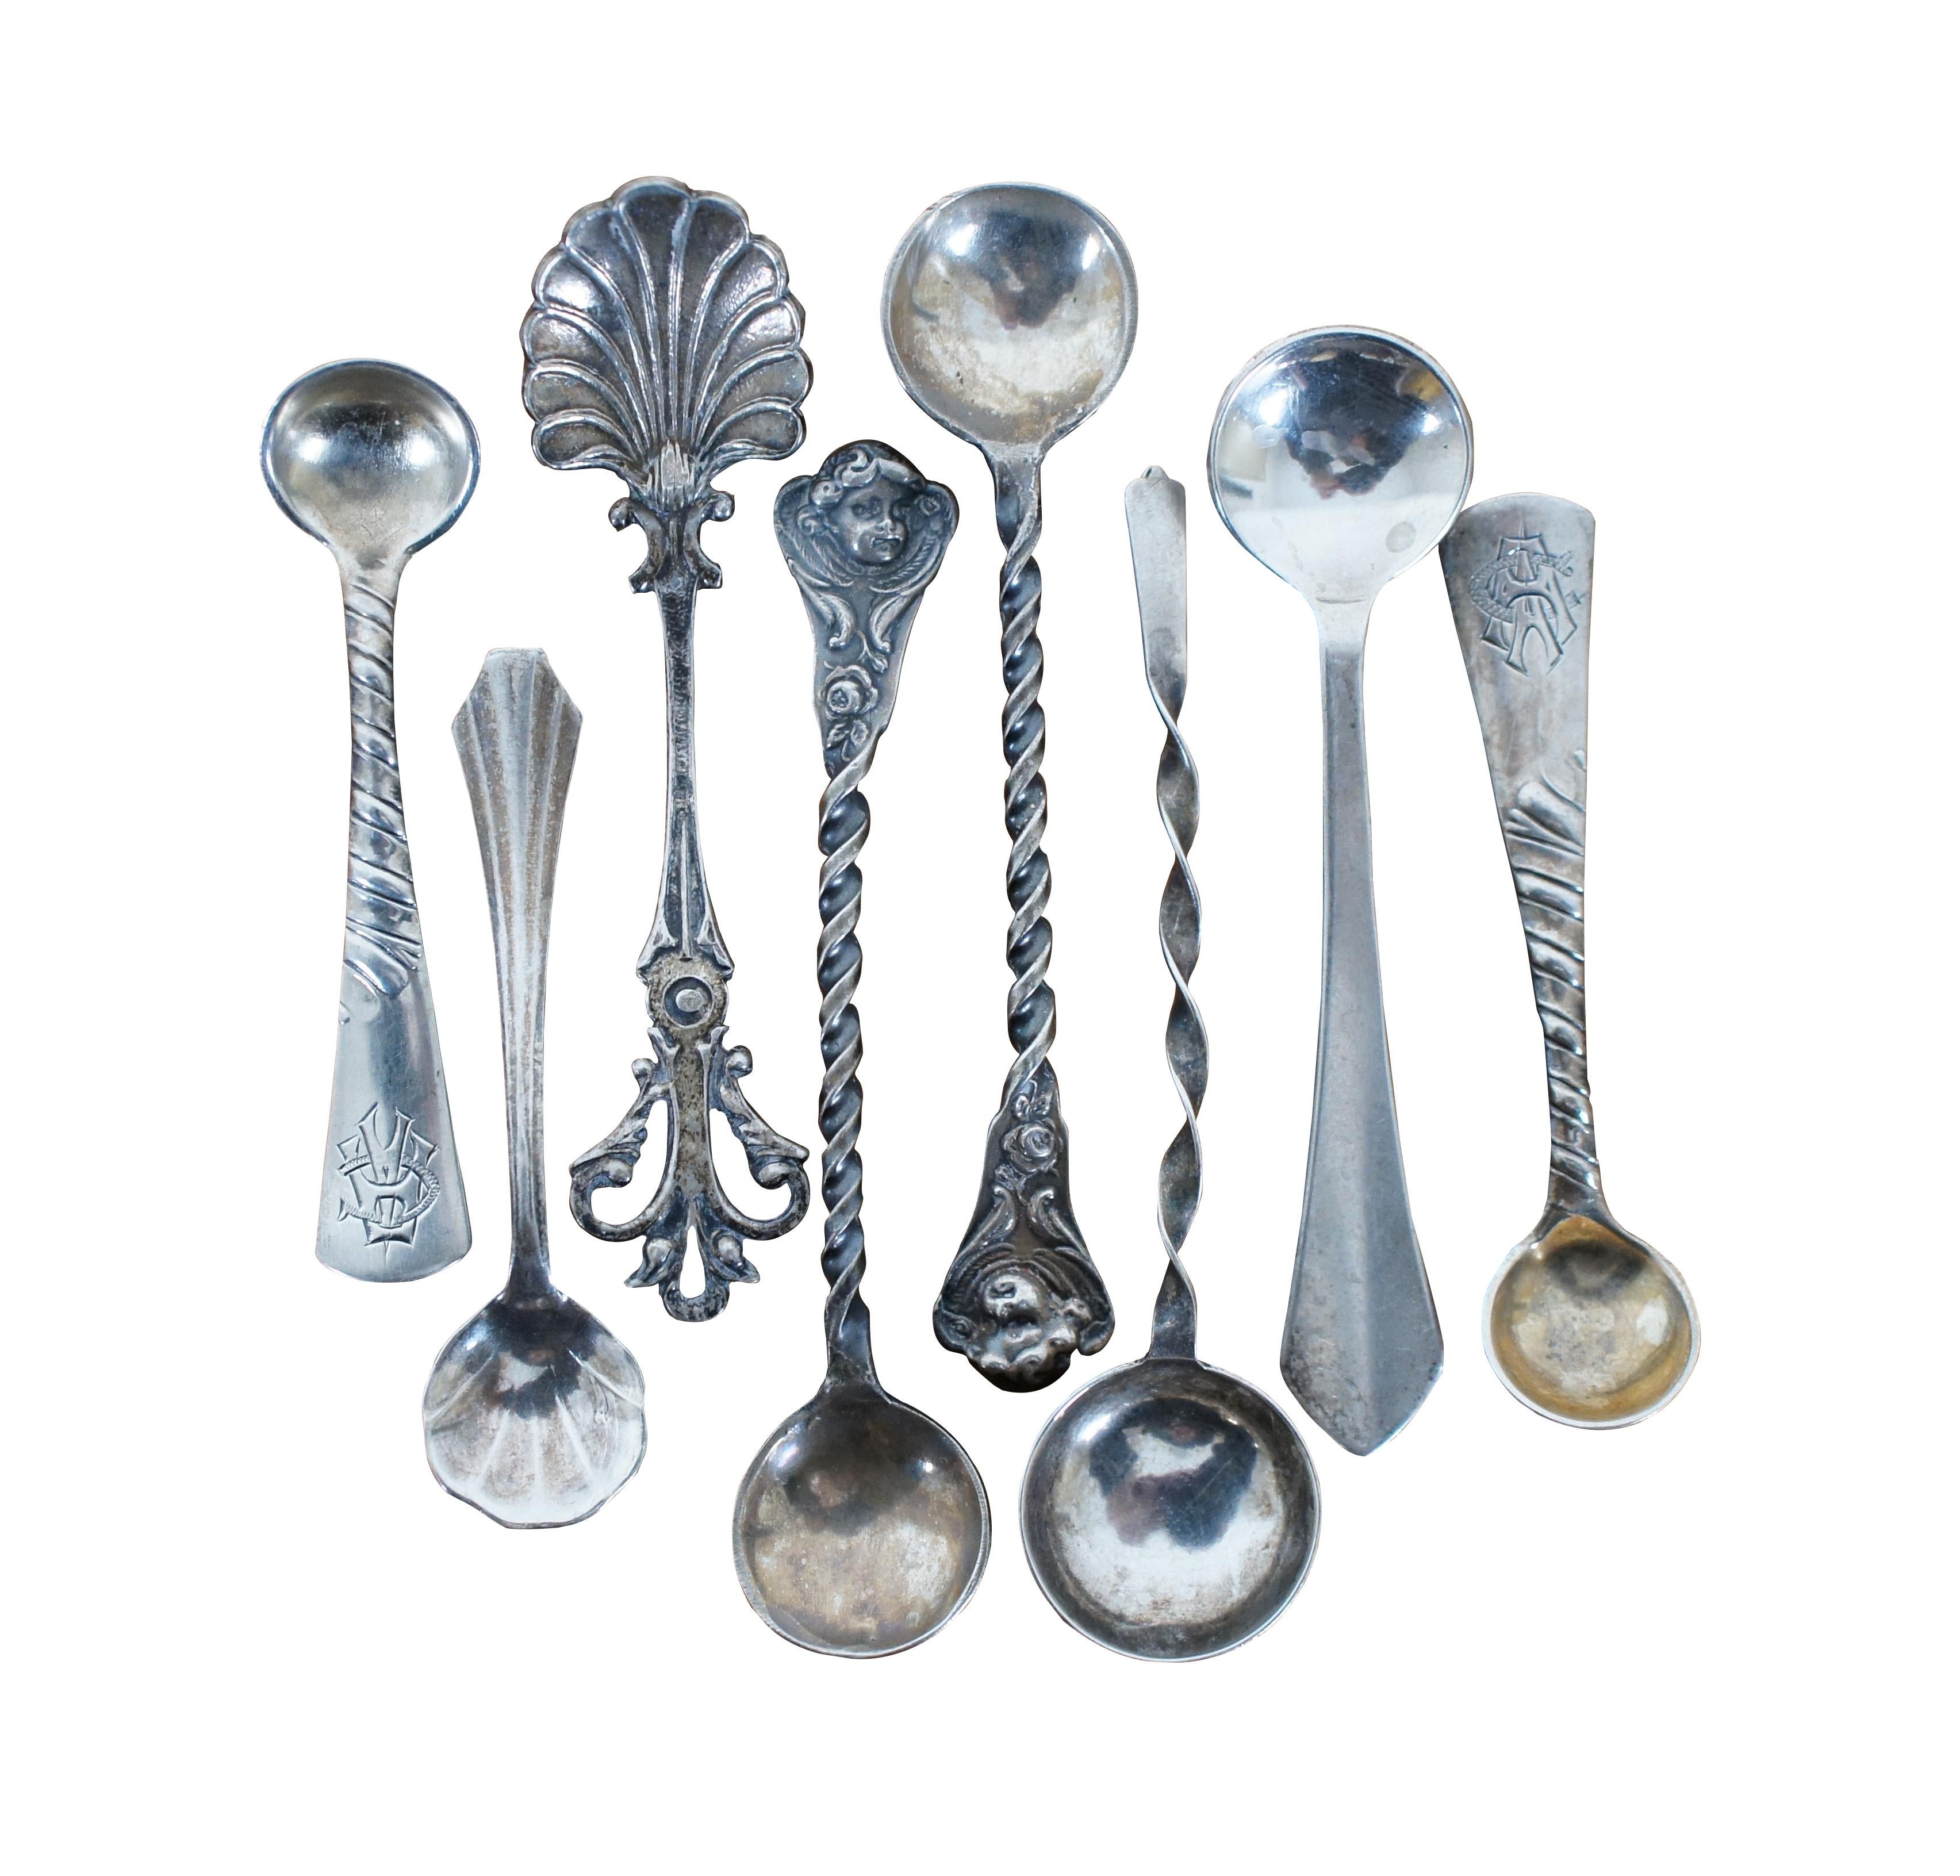 Lot of 8 assorted antique sterling silver salt spoons in a variety of designs and slightly different sizes. Makers include Webster Company and Gorham Mfg Co.

Approx - 2.5” x 0.625” (length x width) / Combined Weight - 24.6 g.